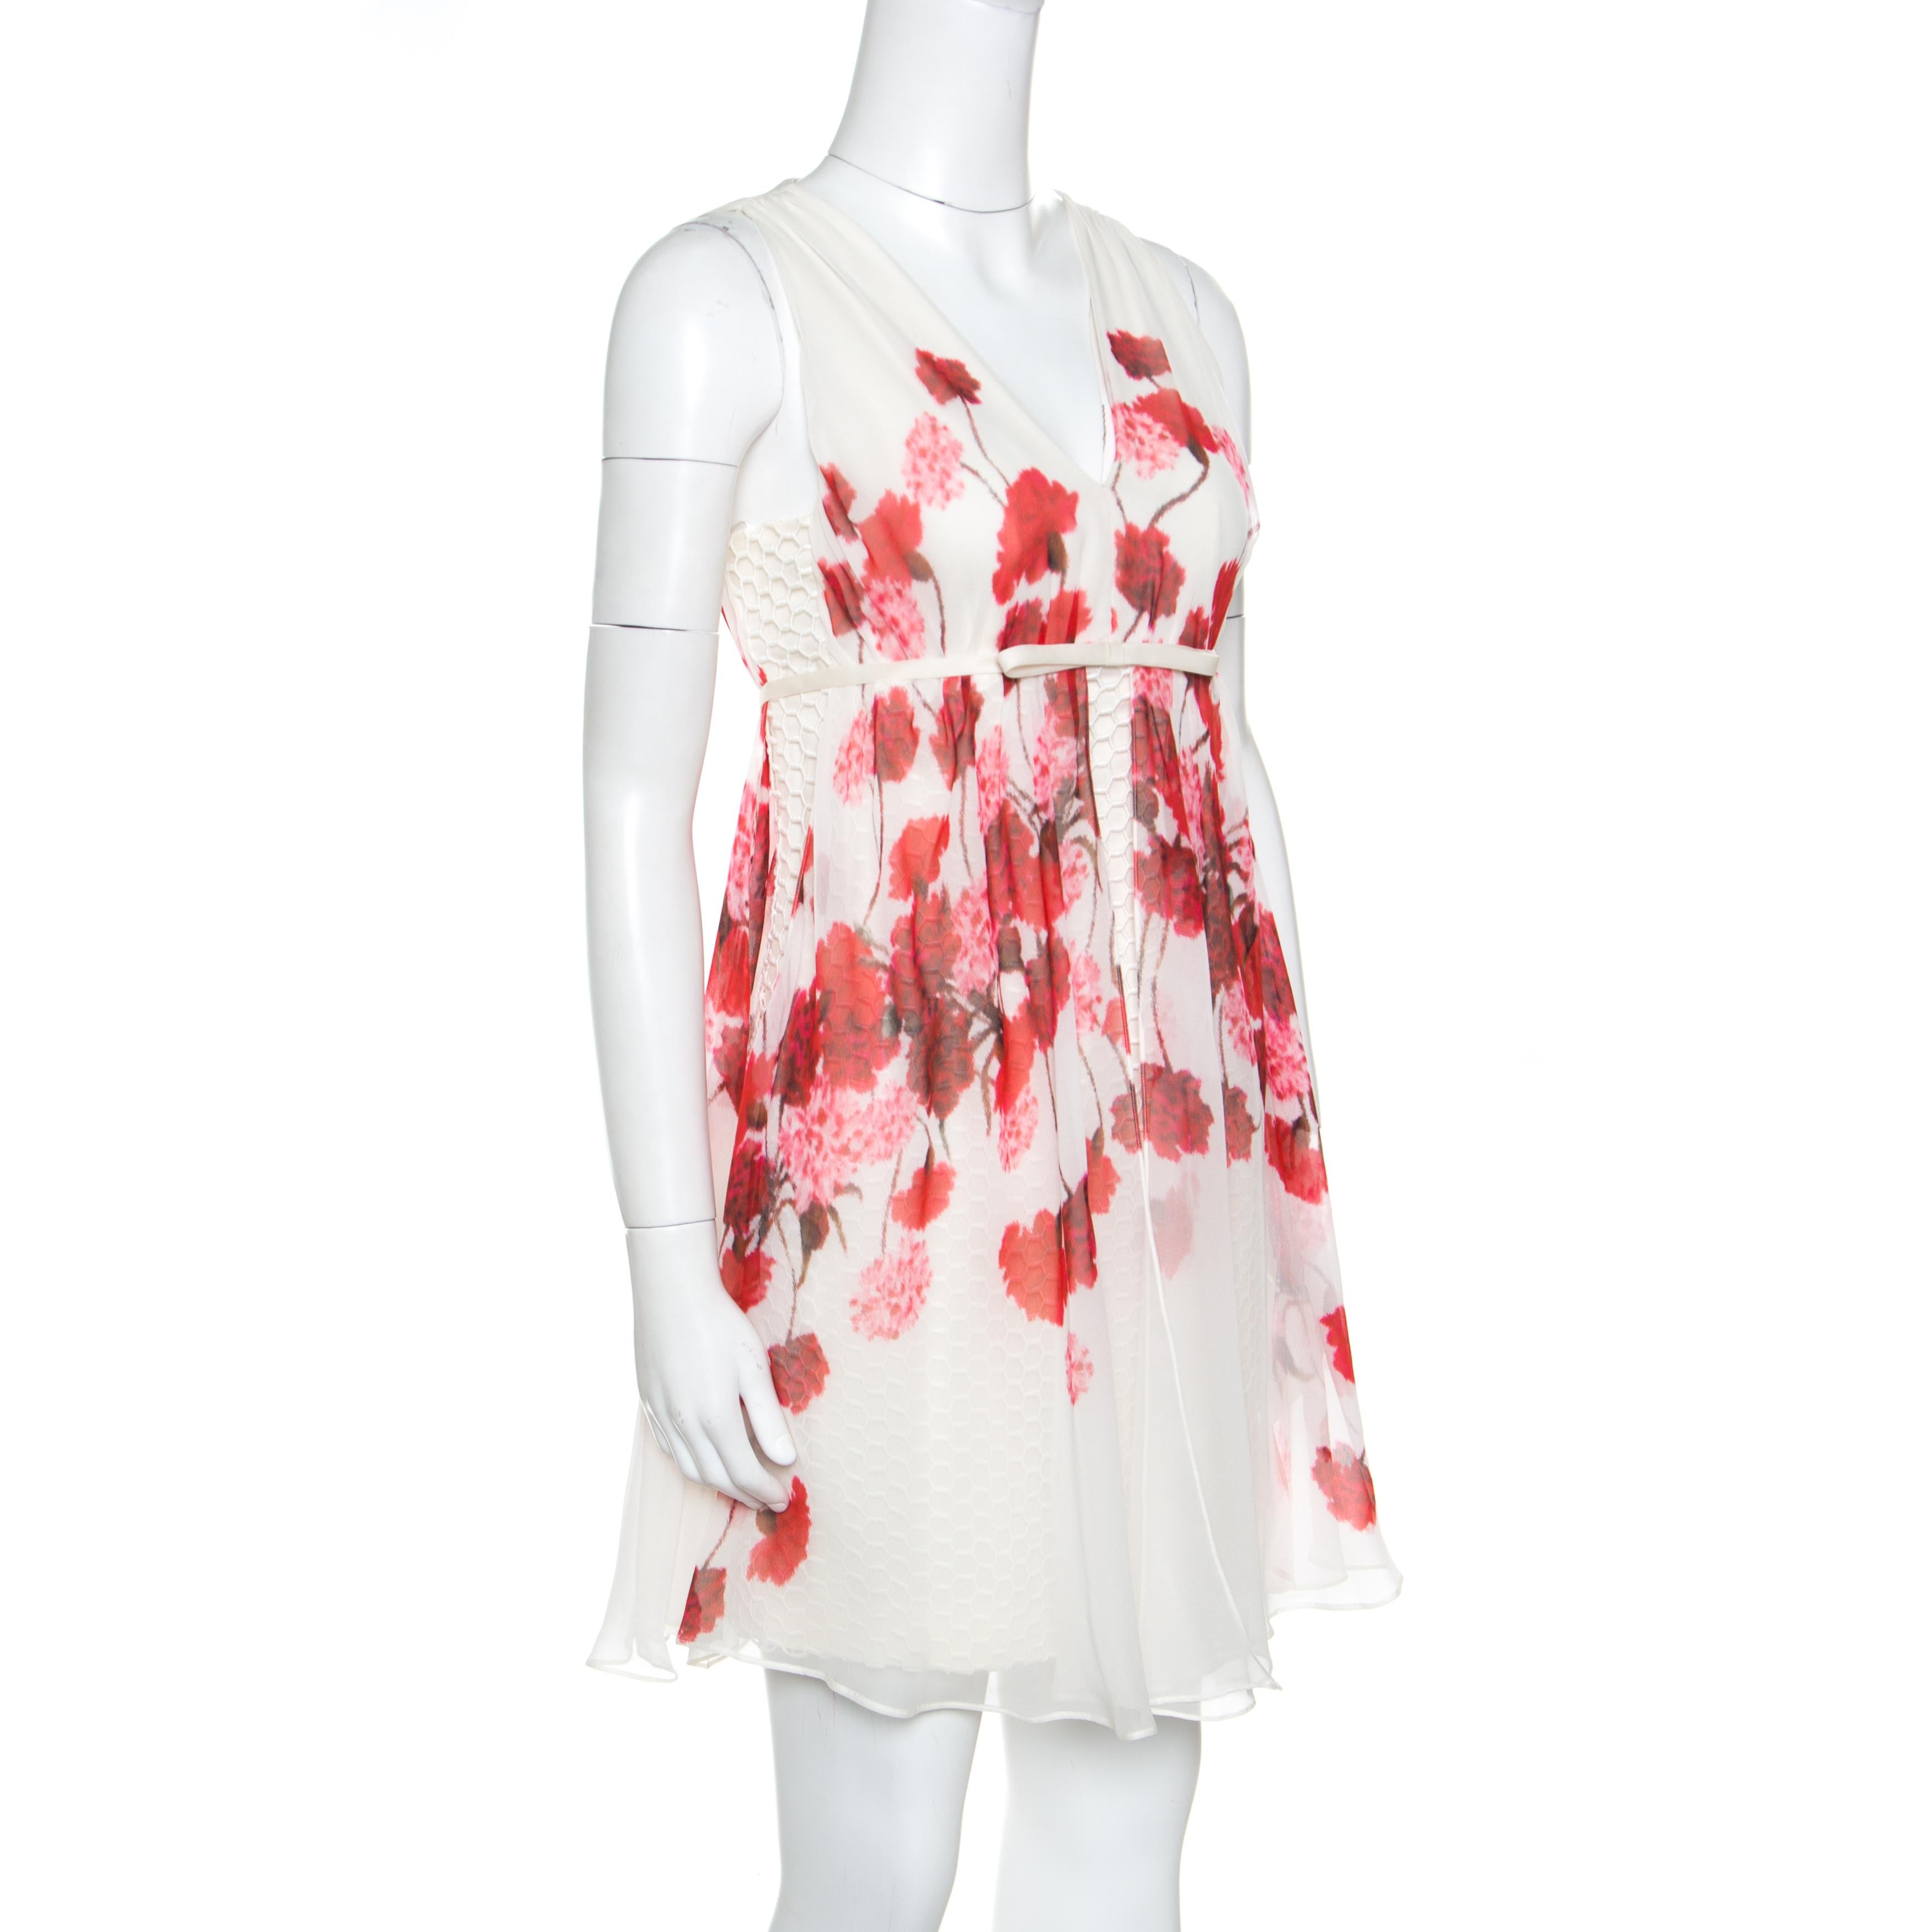 Worn by countless celebrities worldwide and much loved by fashion enthusiasts, Giambattista Valli is a label that stays true to its feminine, elegant and flattering designs. This sleeveless off white dress proves just that! It is made of 100% silk